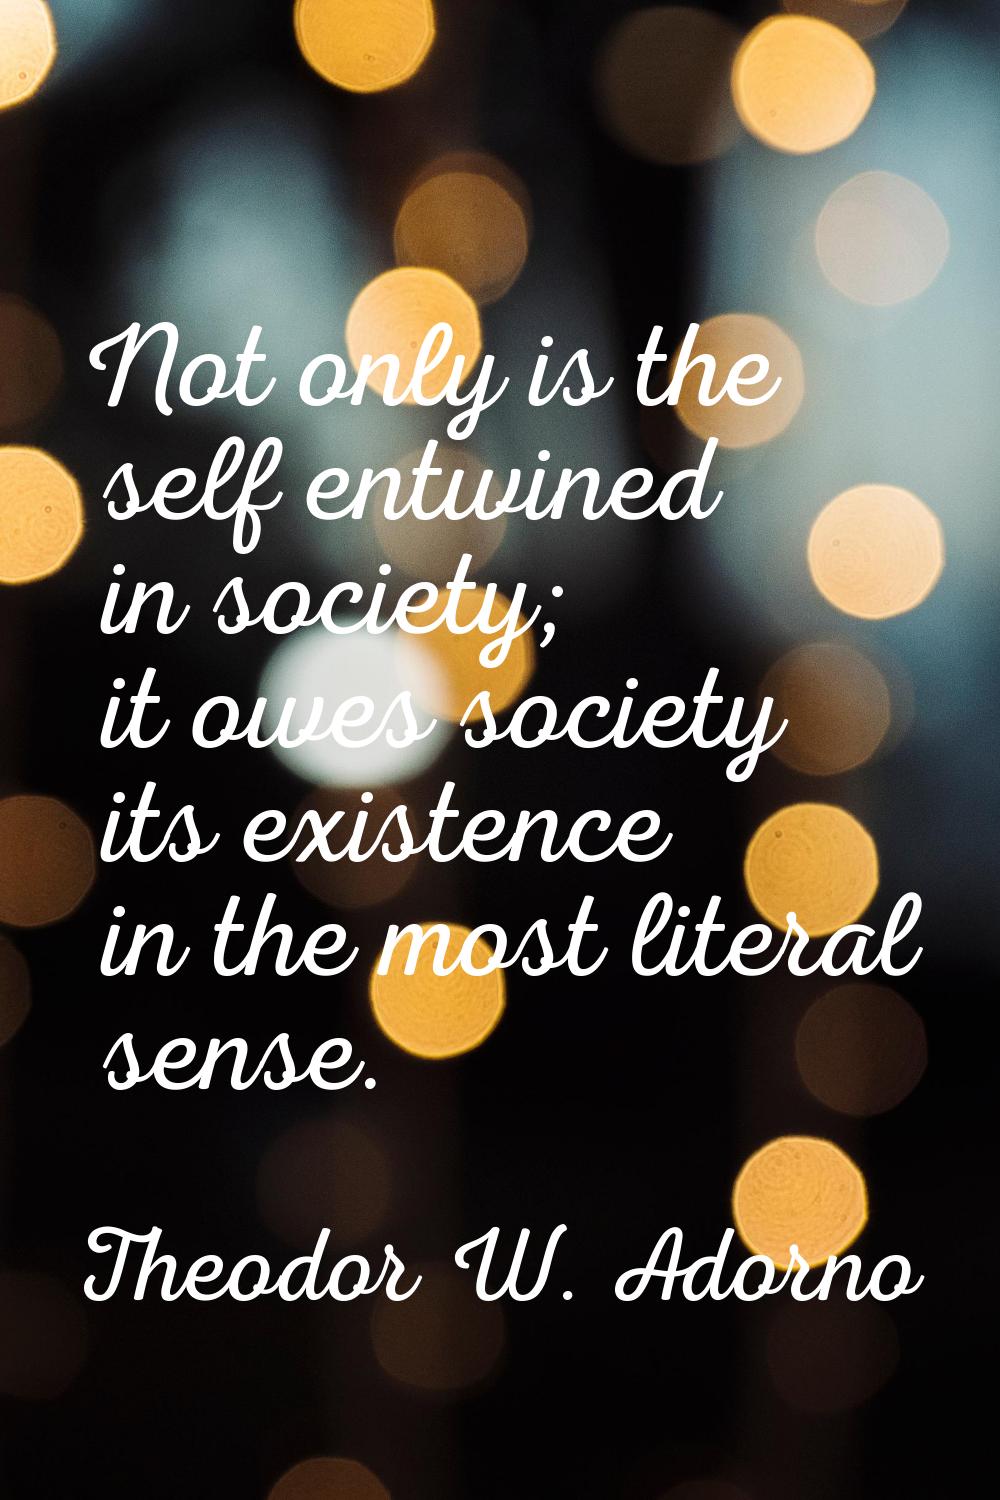 Not only is the self entwined in society; it owes society its existence in the most literal sense.